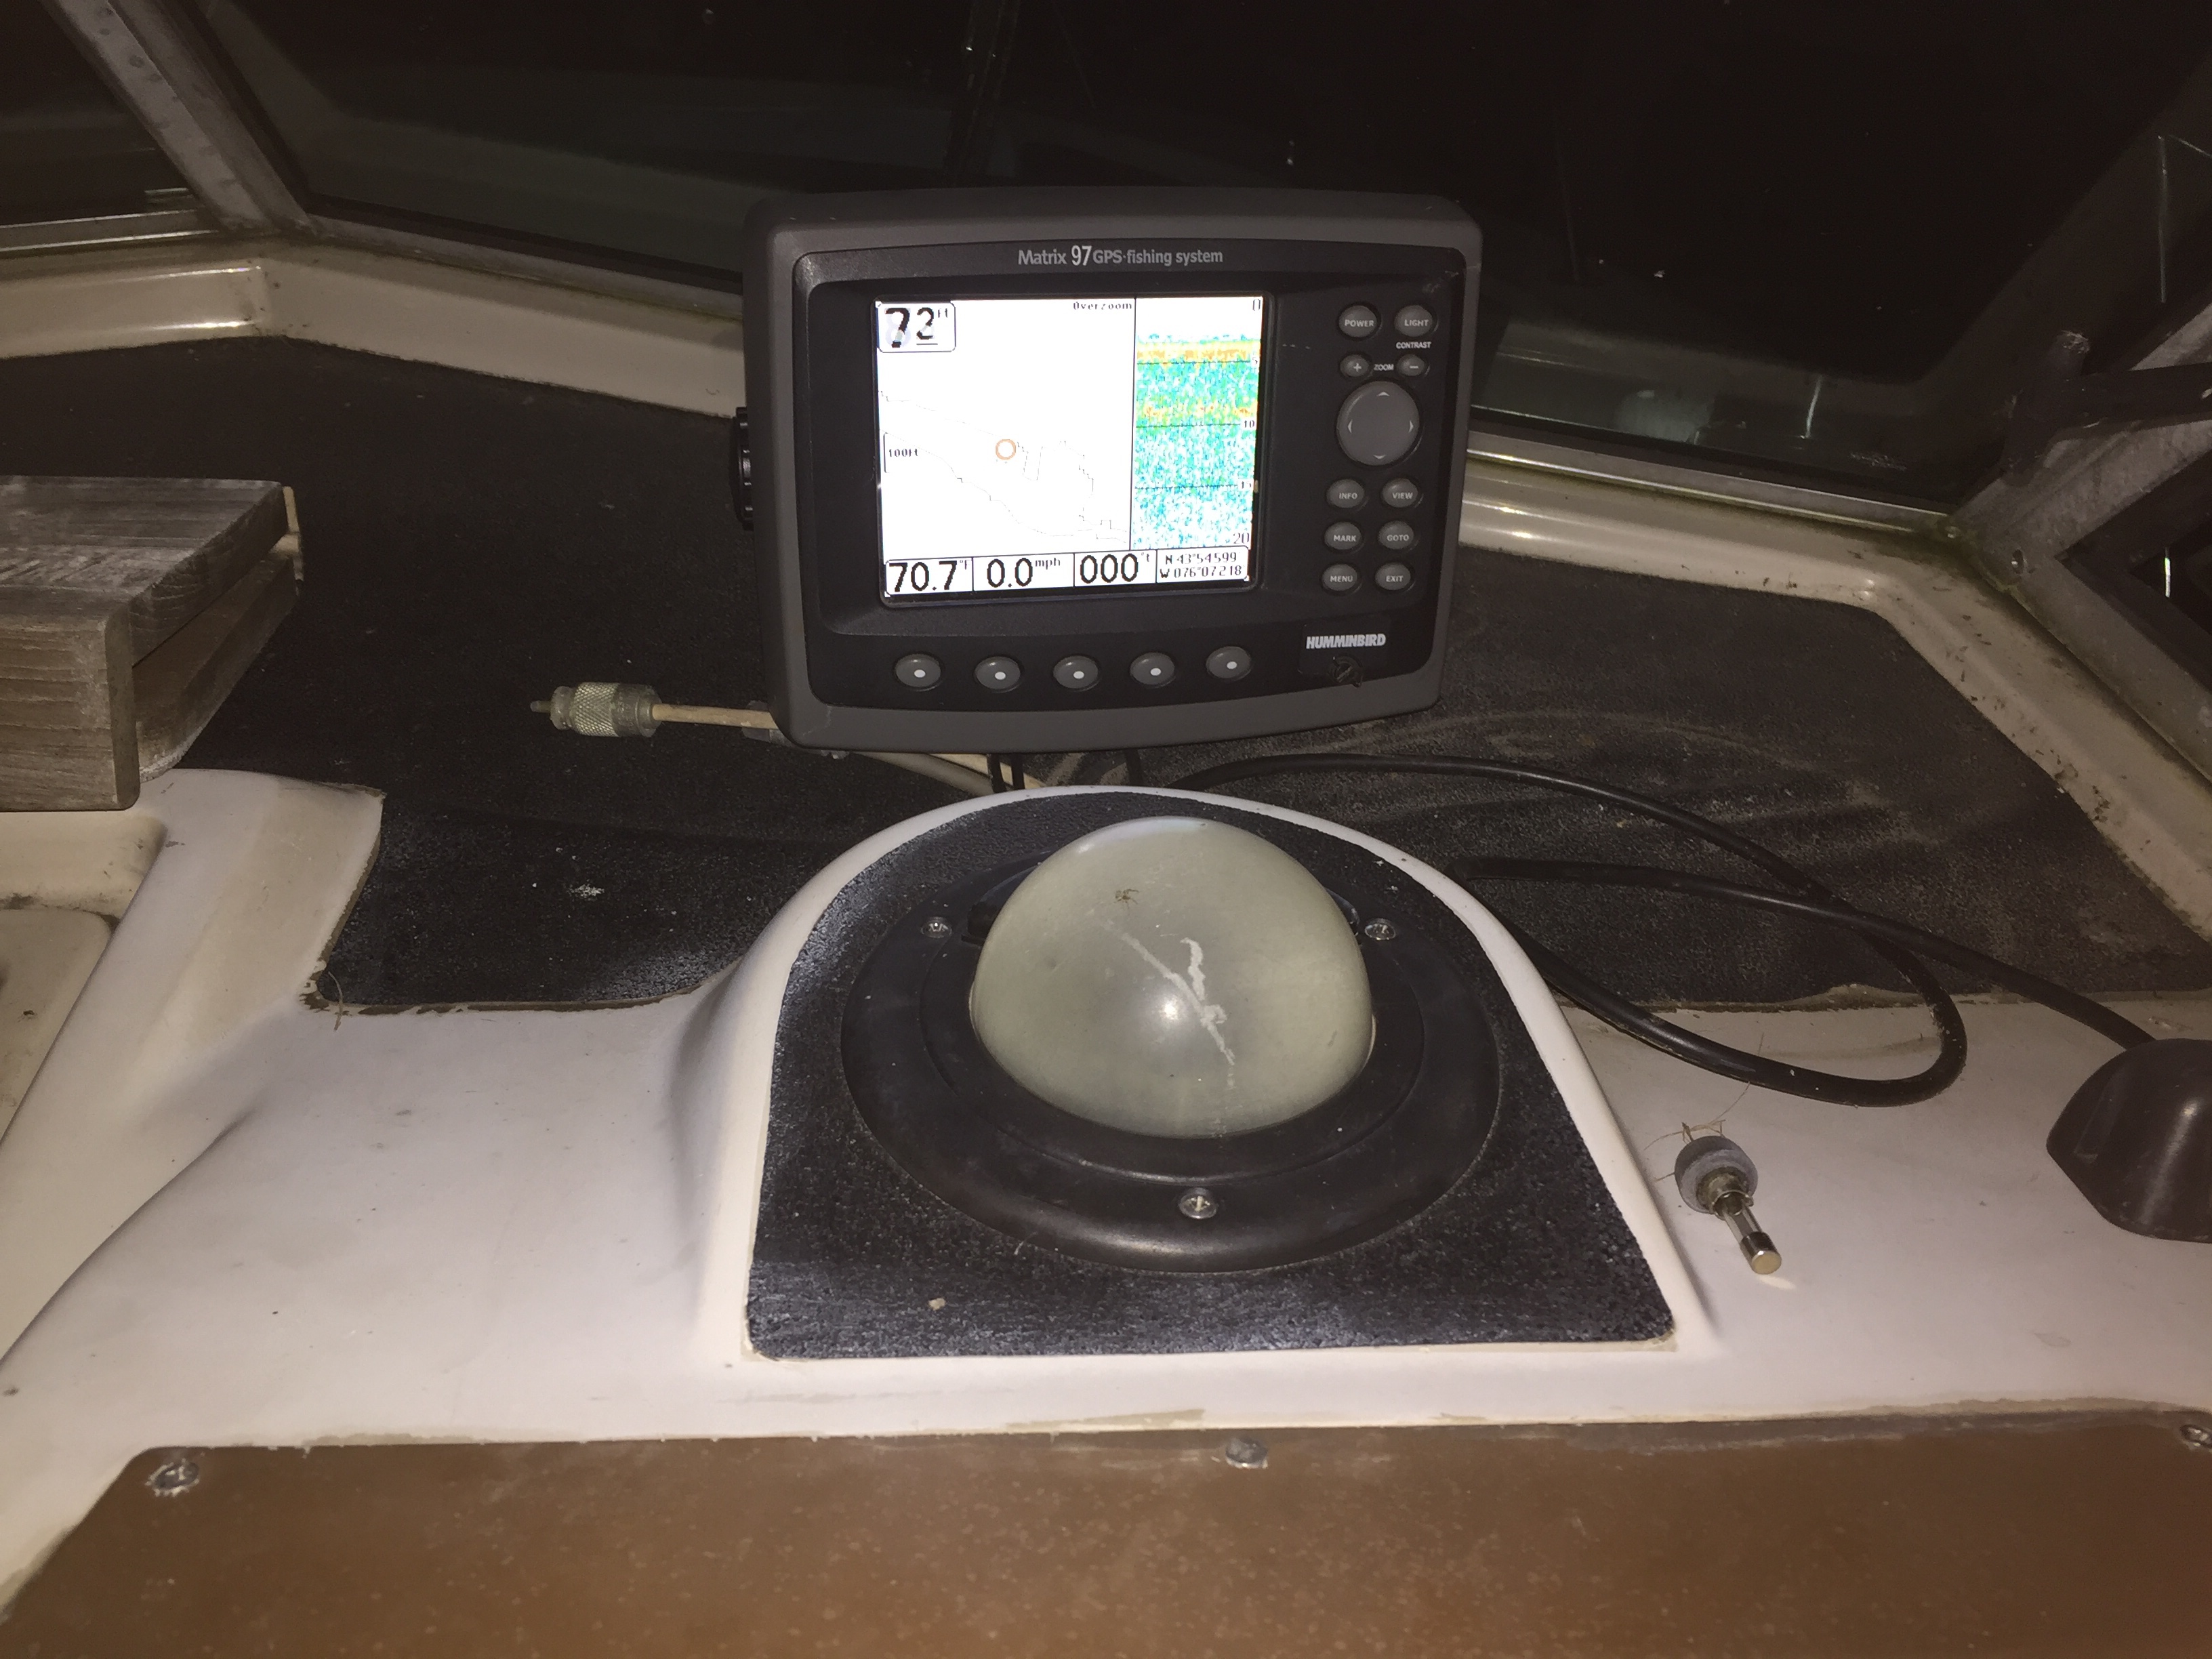 Hummingbird Matrix 97 gps fish finder - Classifieds - Buy, Sell, Trade or  Rent - Lake Ontario United - Lake Ontario's Largest Fishing & Hunting  Community - New York and Ontario Canada